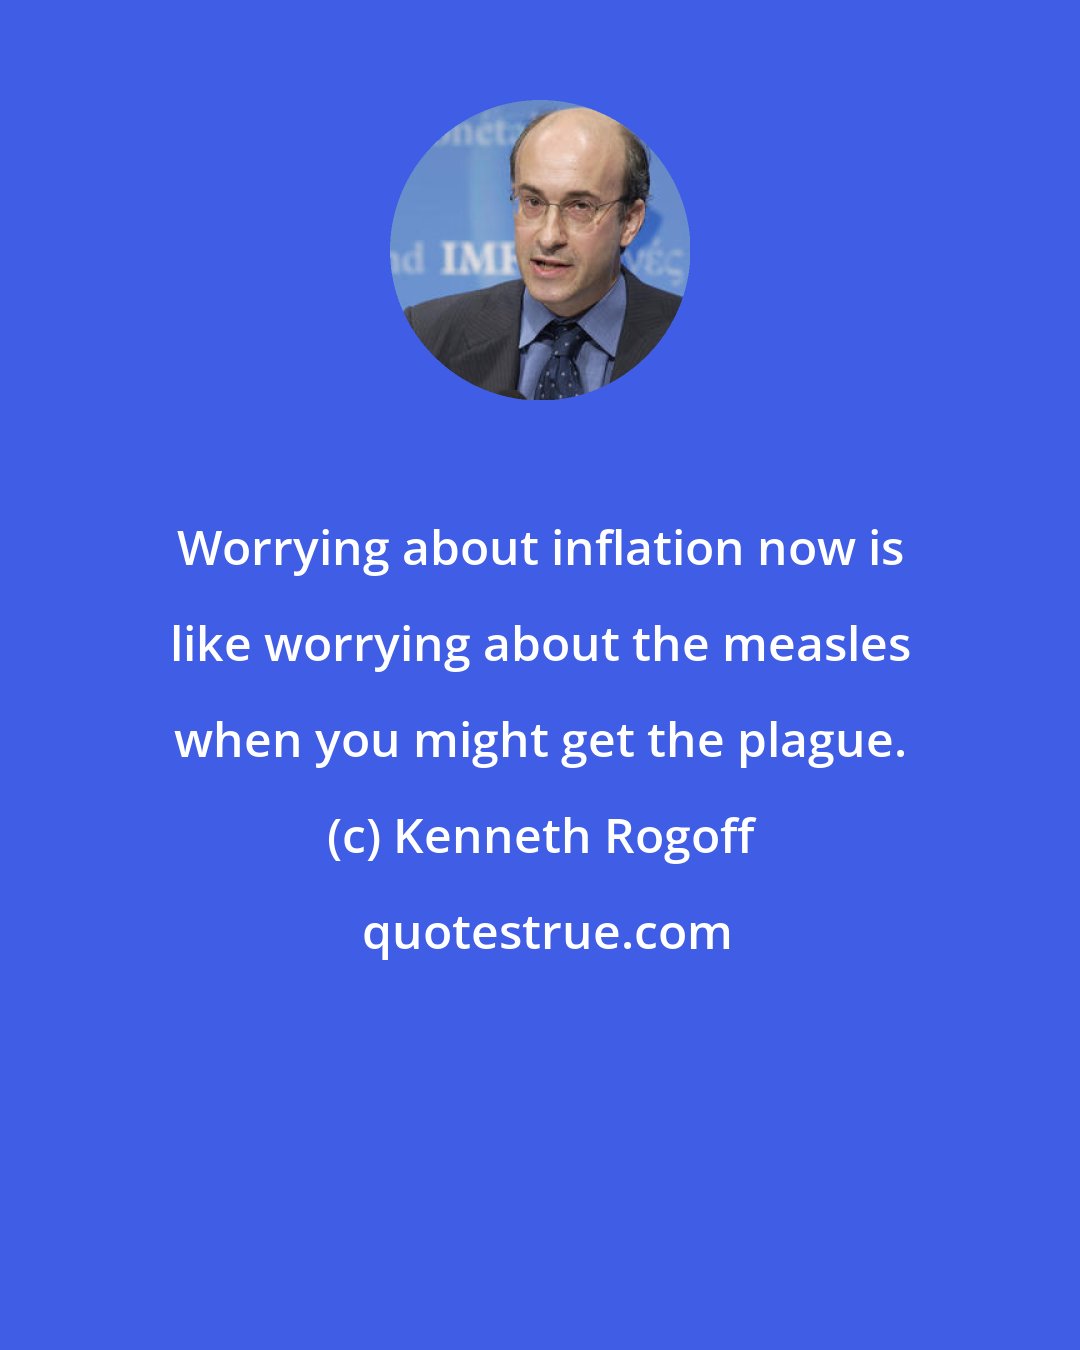 Kenneth Rogoff: Worrying about inflation now is like worrying about the measles when you might get the plague.